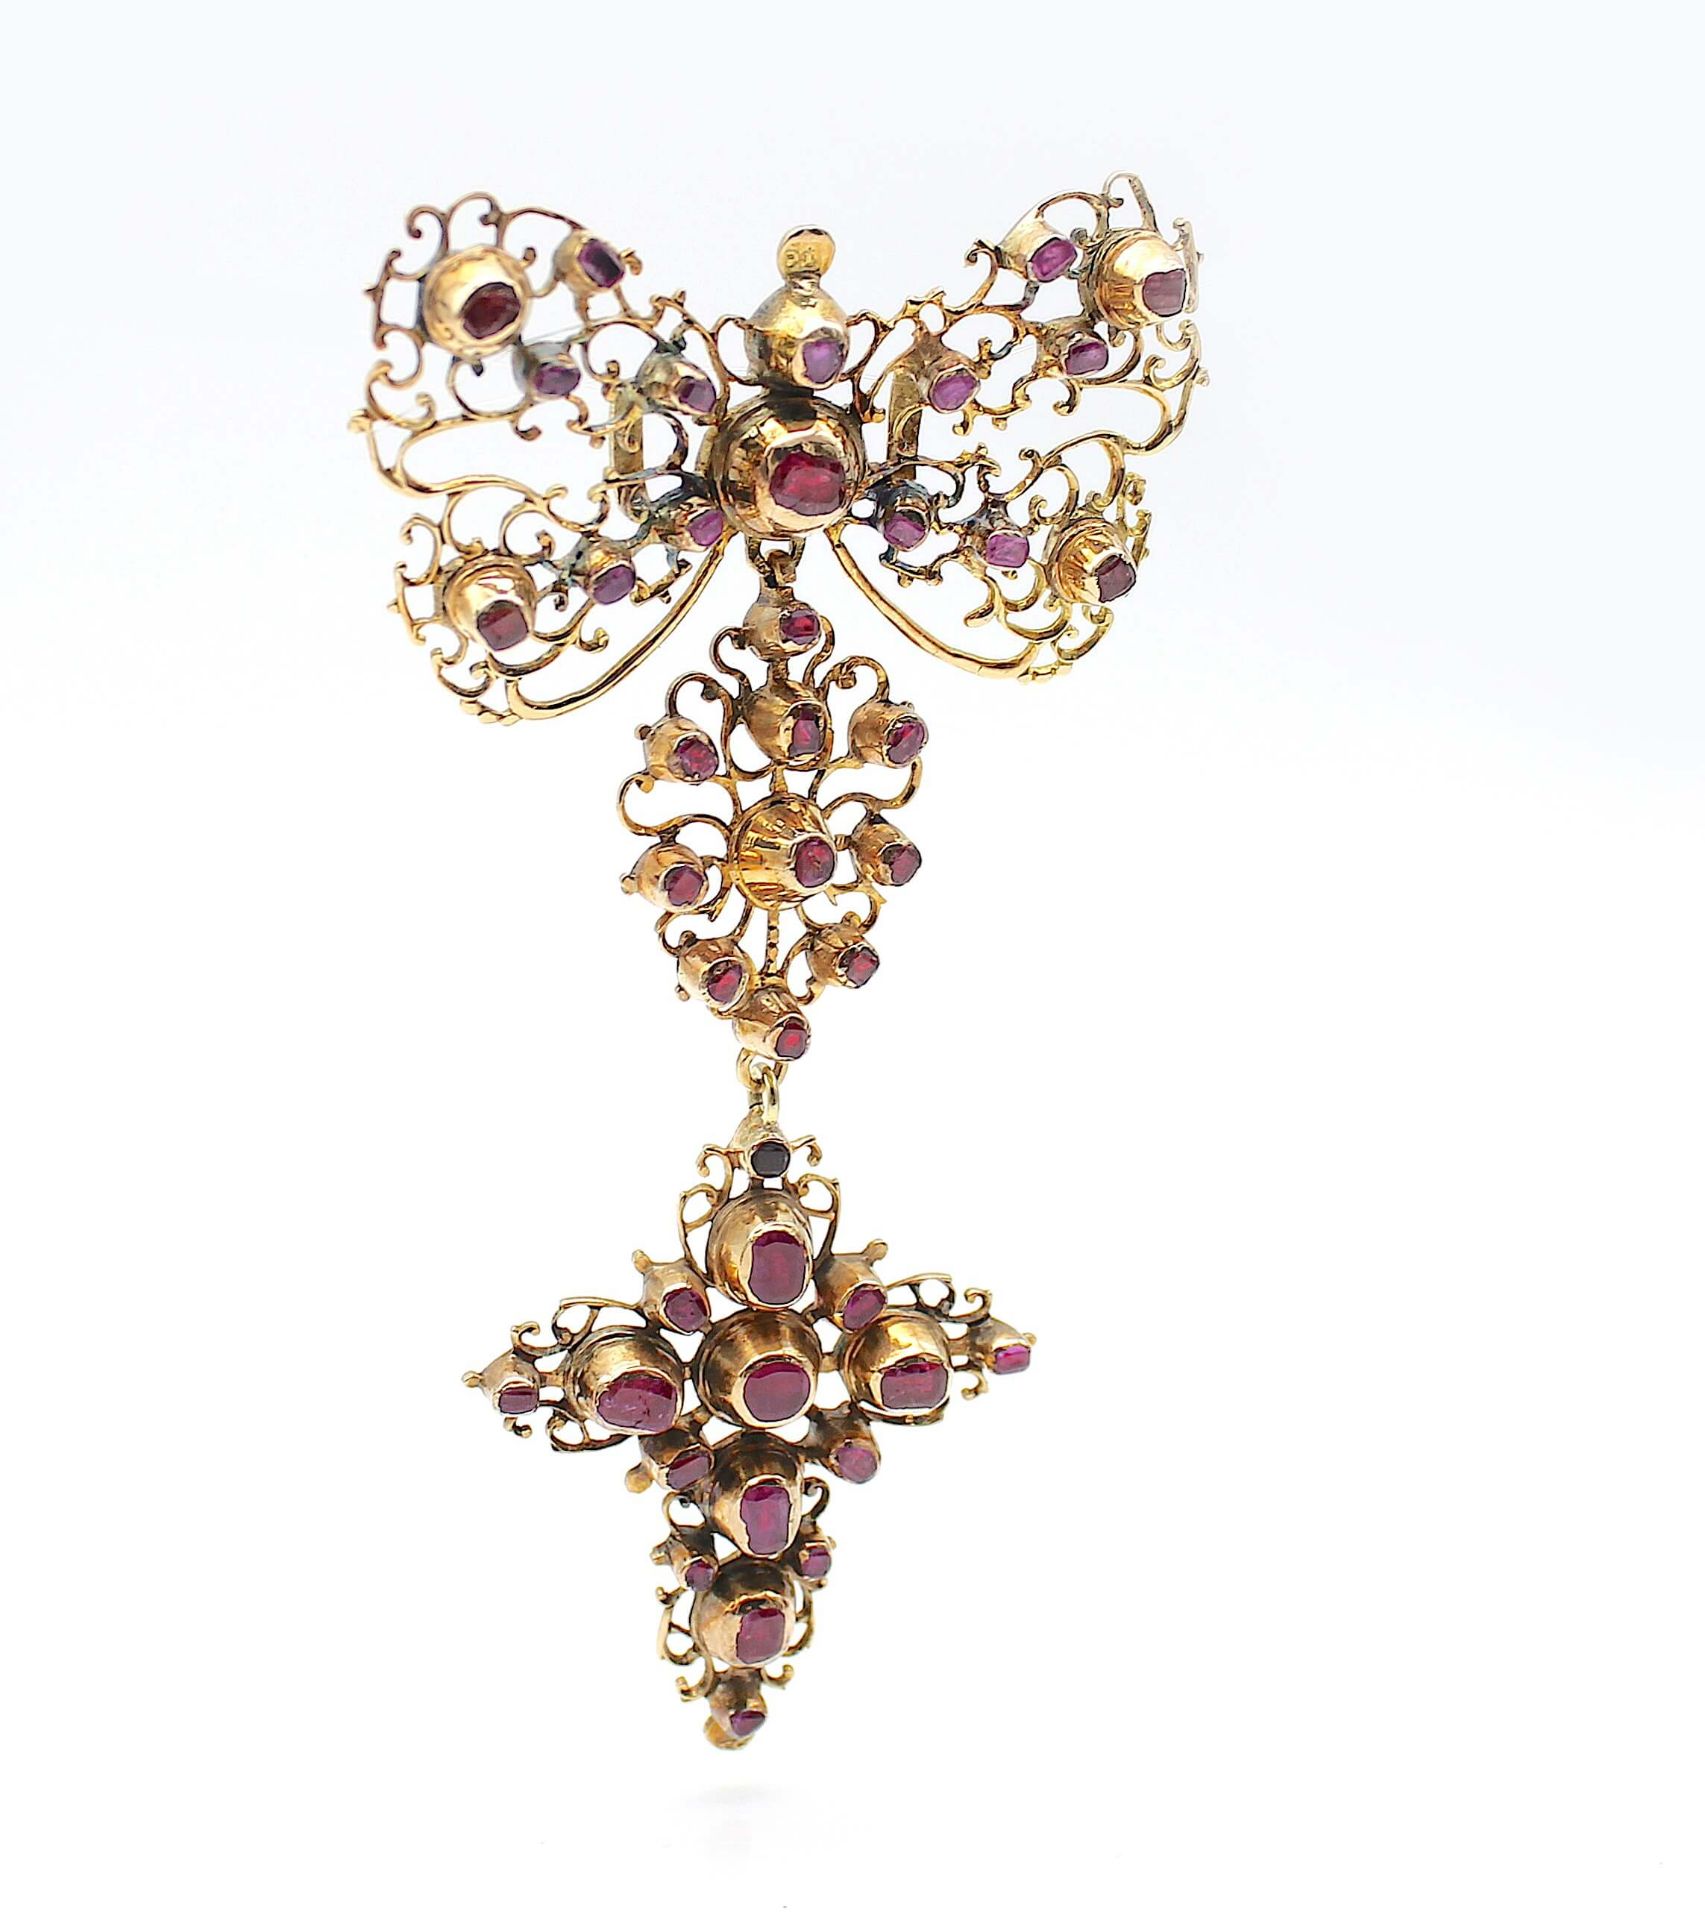 Corsage brooch / pendant around 1750 with sapphires and rubies - Image 5 of 6